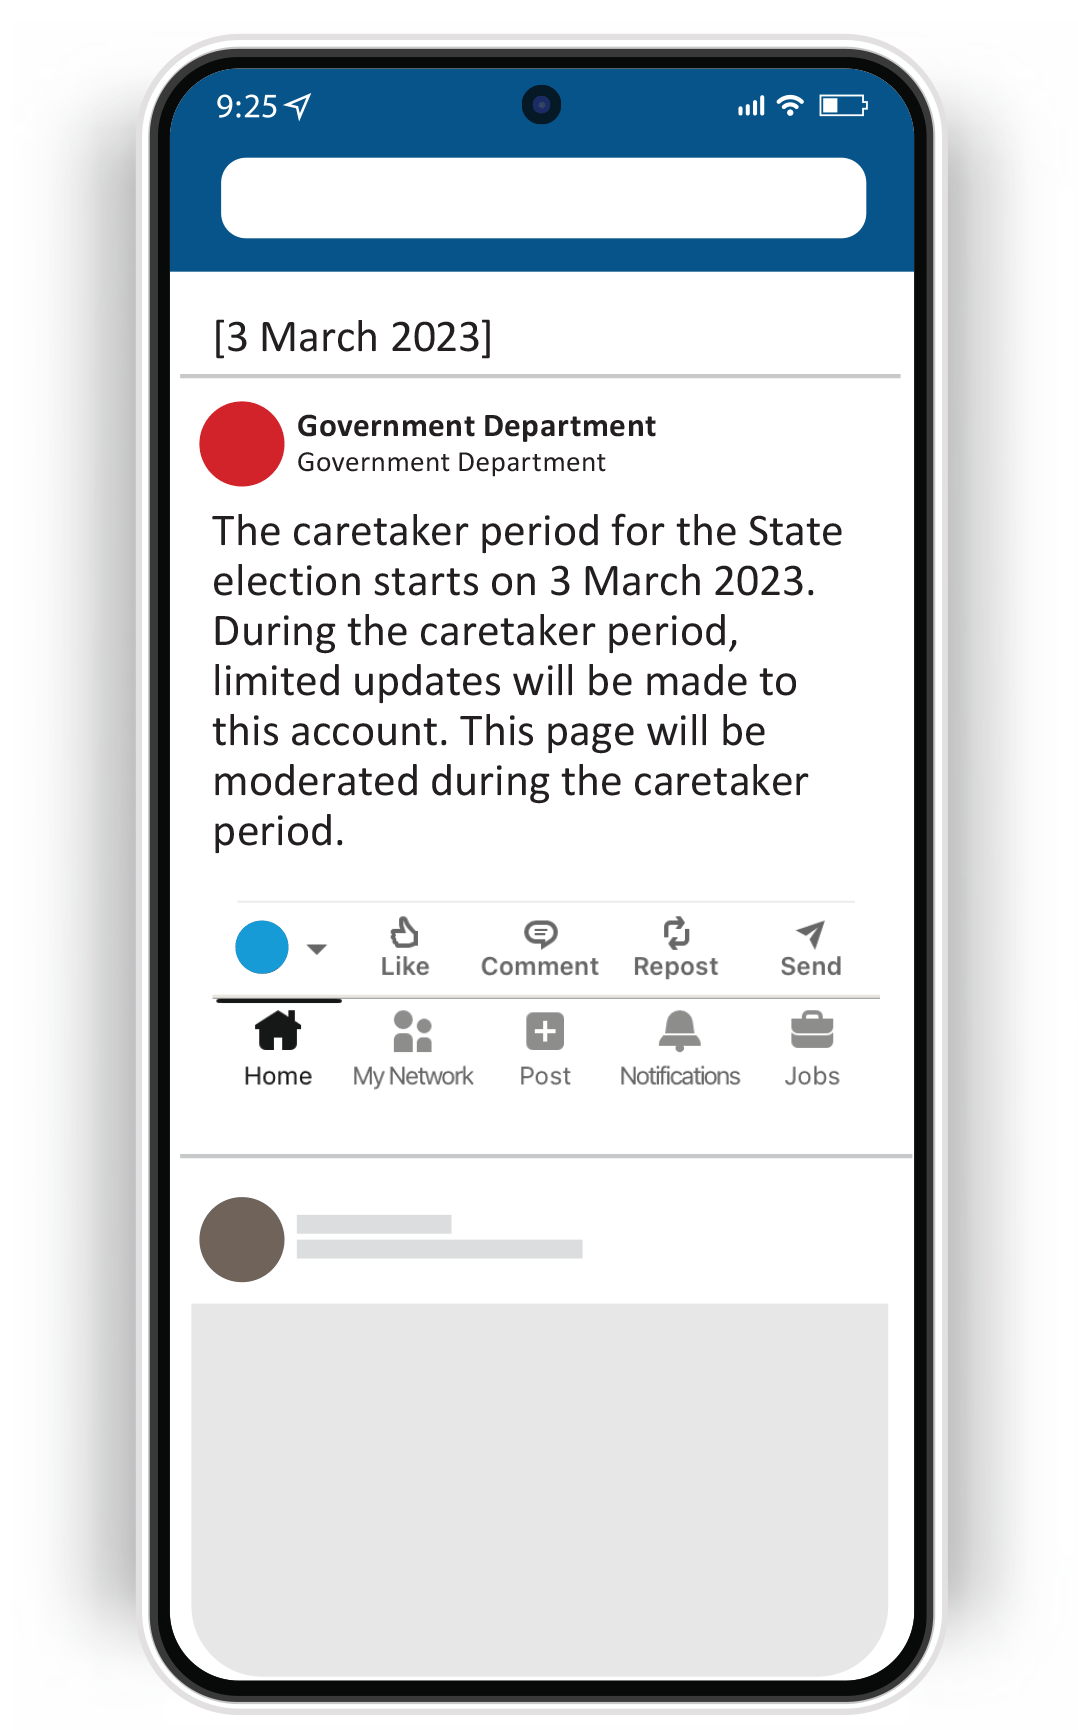 Example 3 The caretaker period for the state election starts on 3 March 2023. During the caretaker period limited updates will be made to this account. This page will be moderated during the caretaker period.